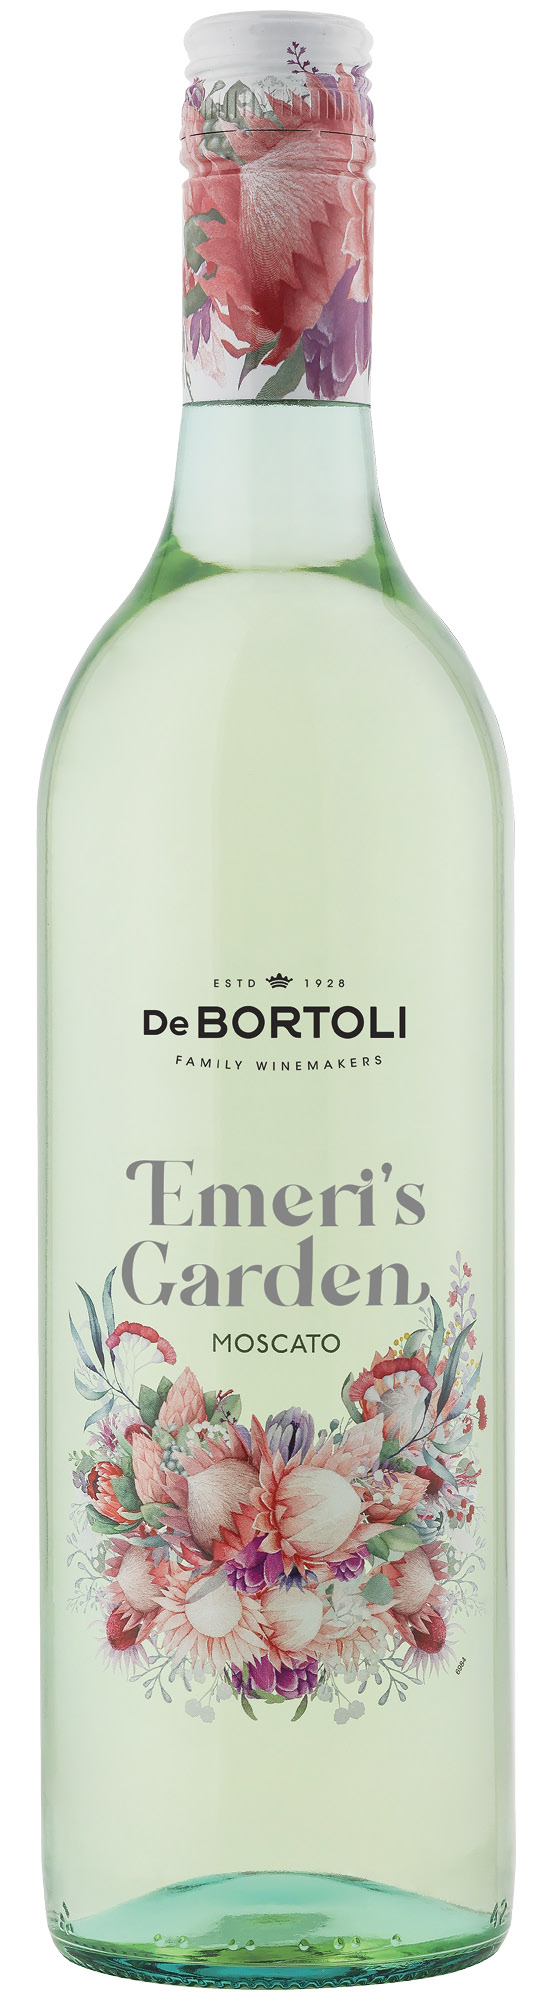 Product Image for Emeri's Garden Moscato